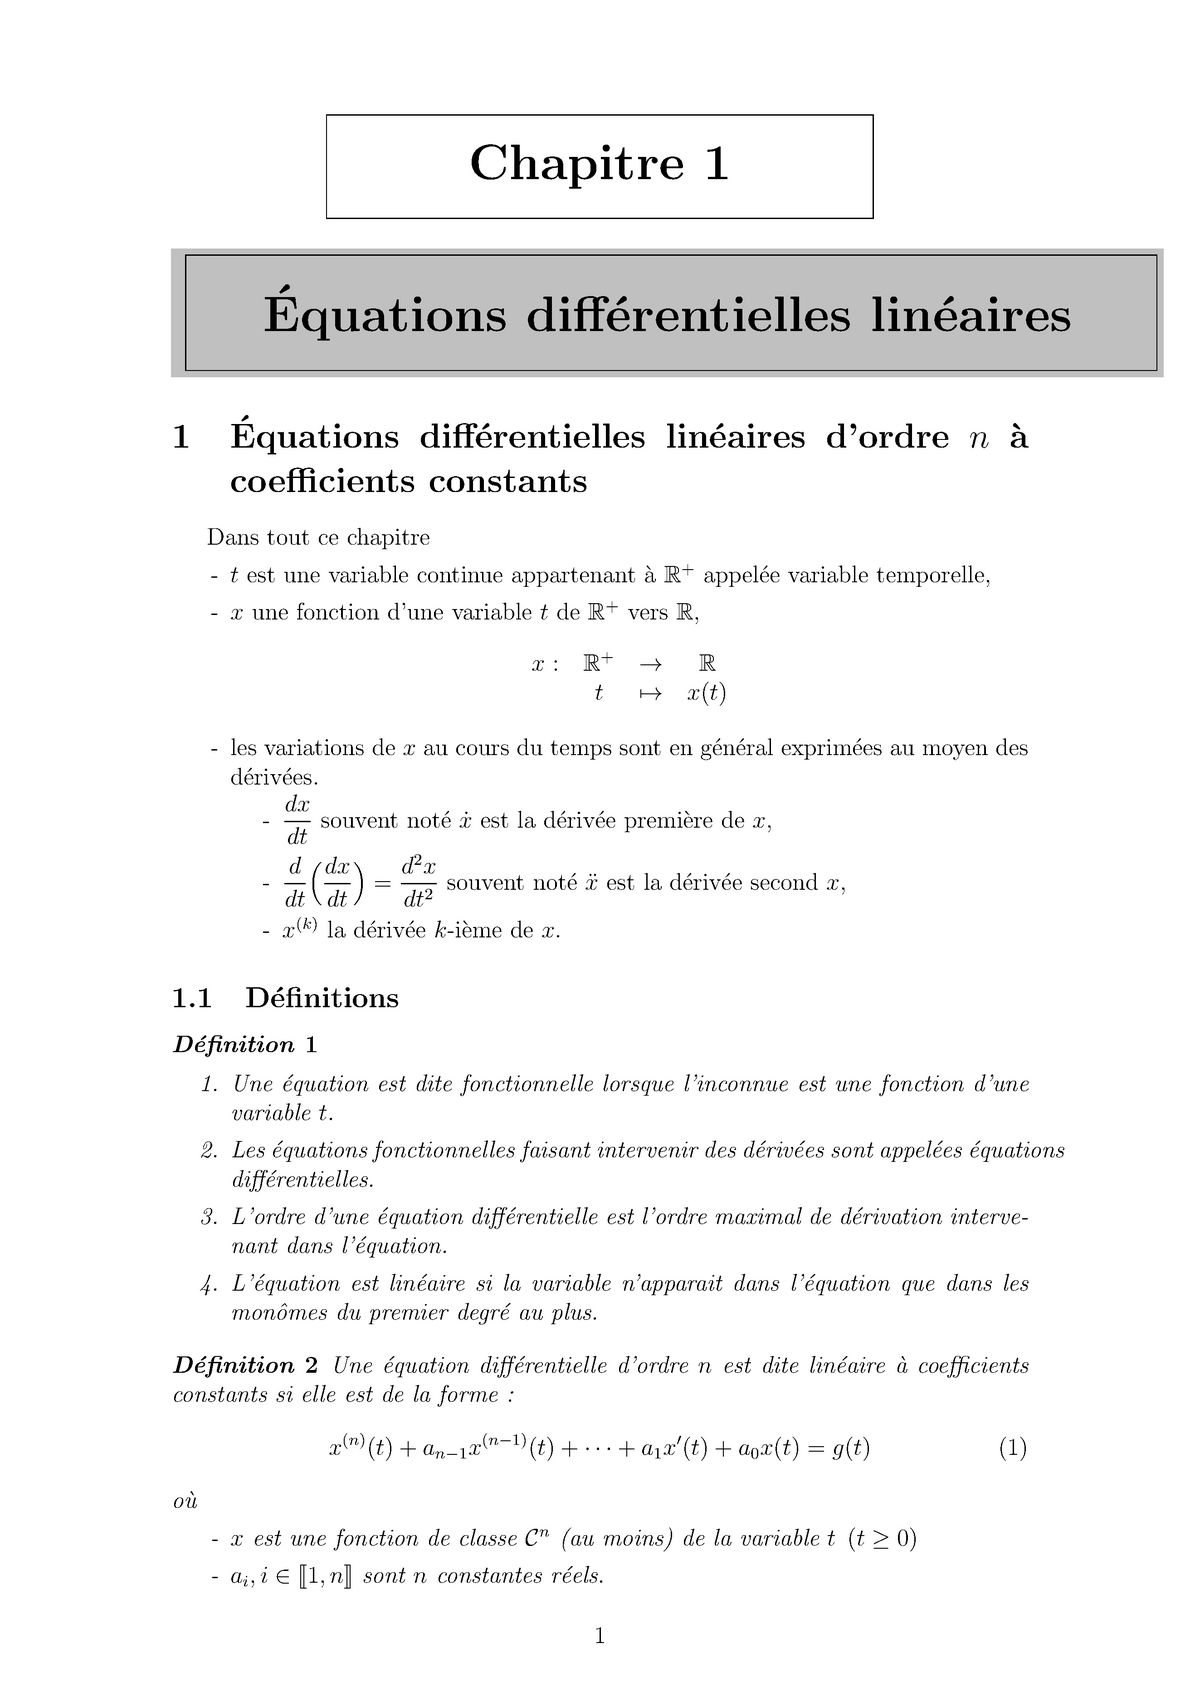 Chp1 Equations Differentielles Lineaires Studocu